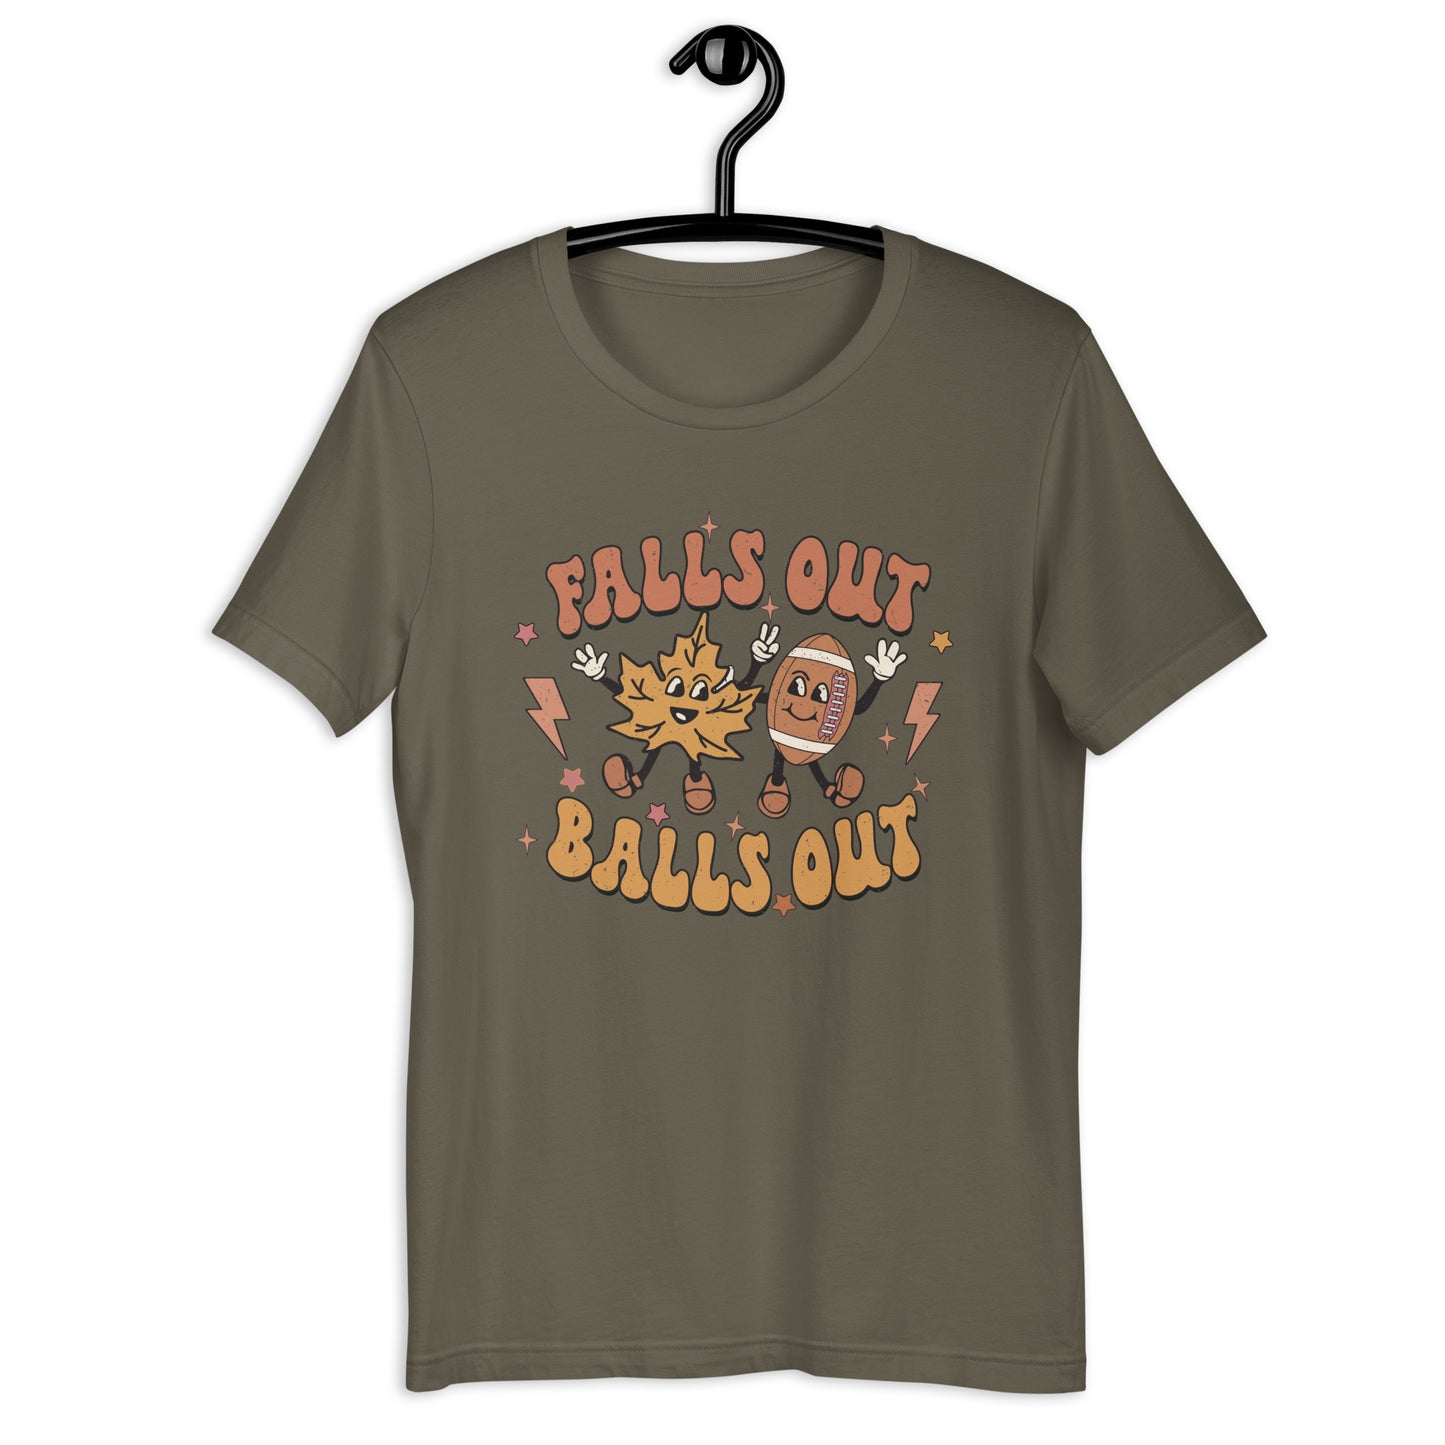 Falls out Balls out t-shirt